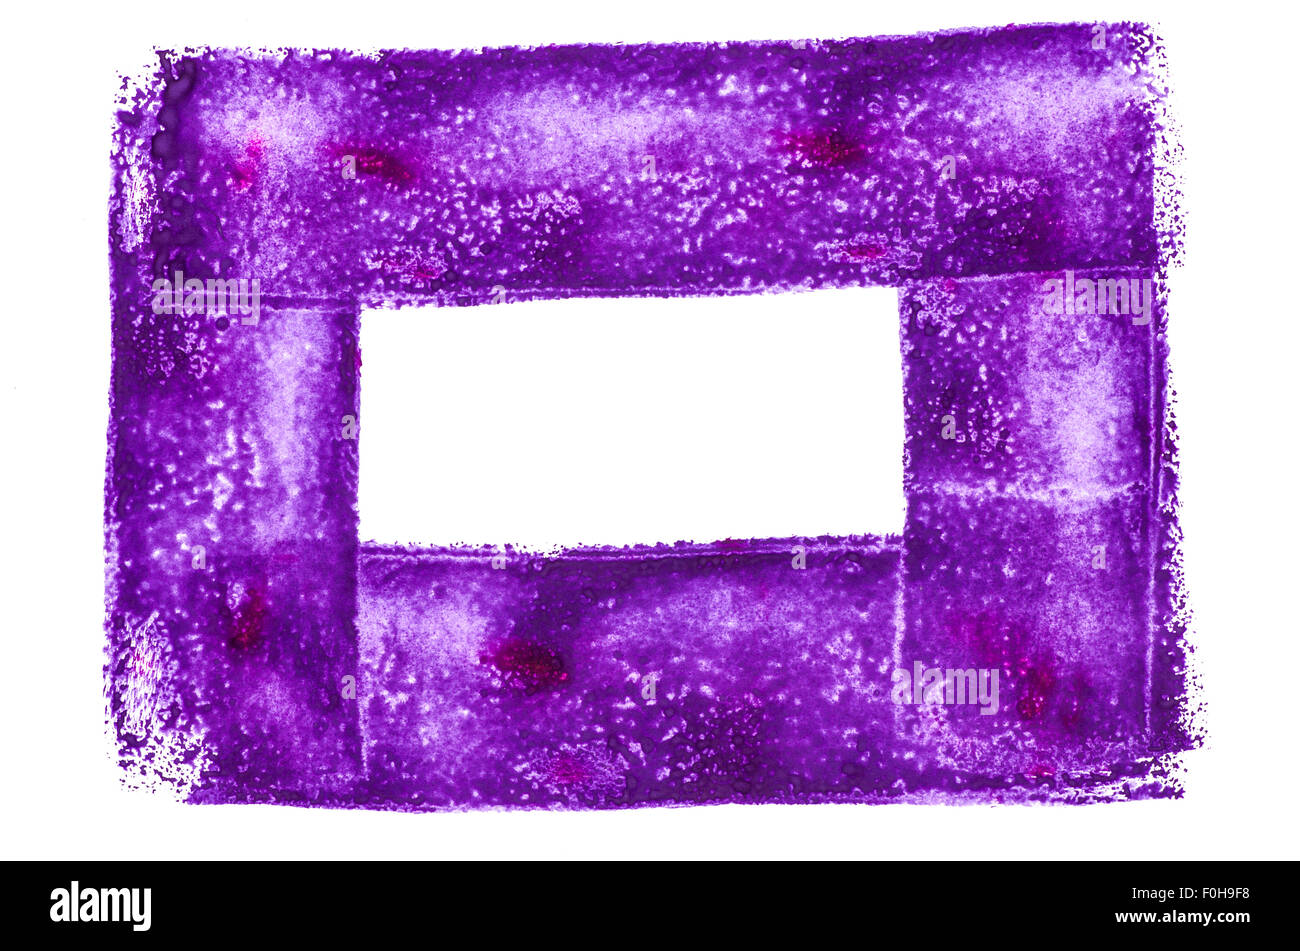 violet watercolor painted frame on white paper background Stock Photo